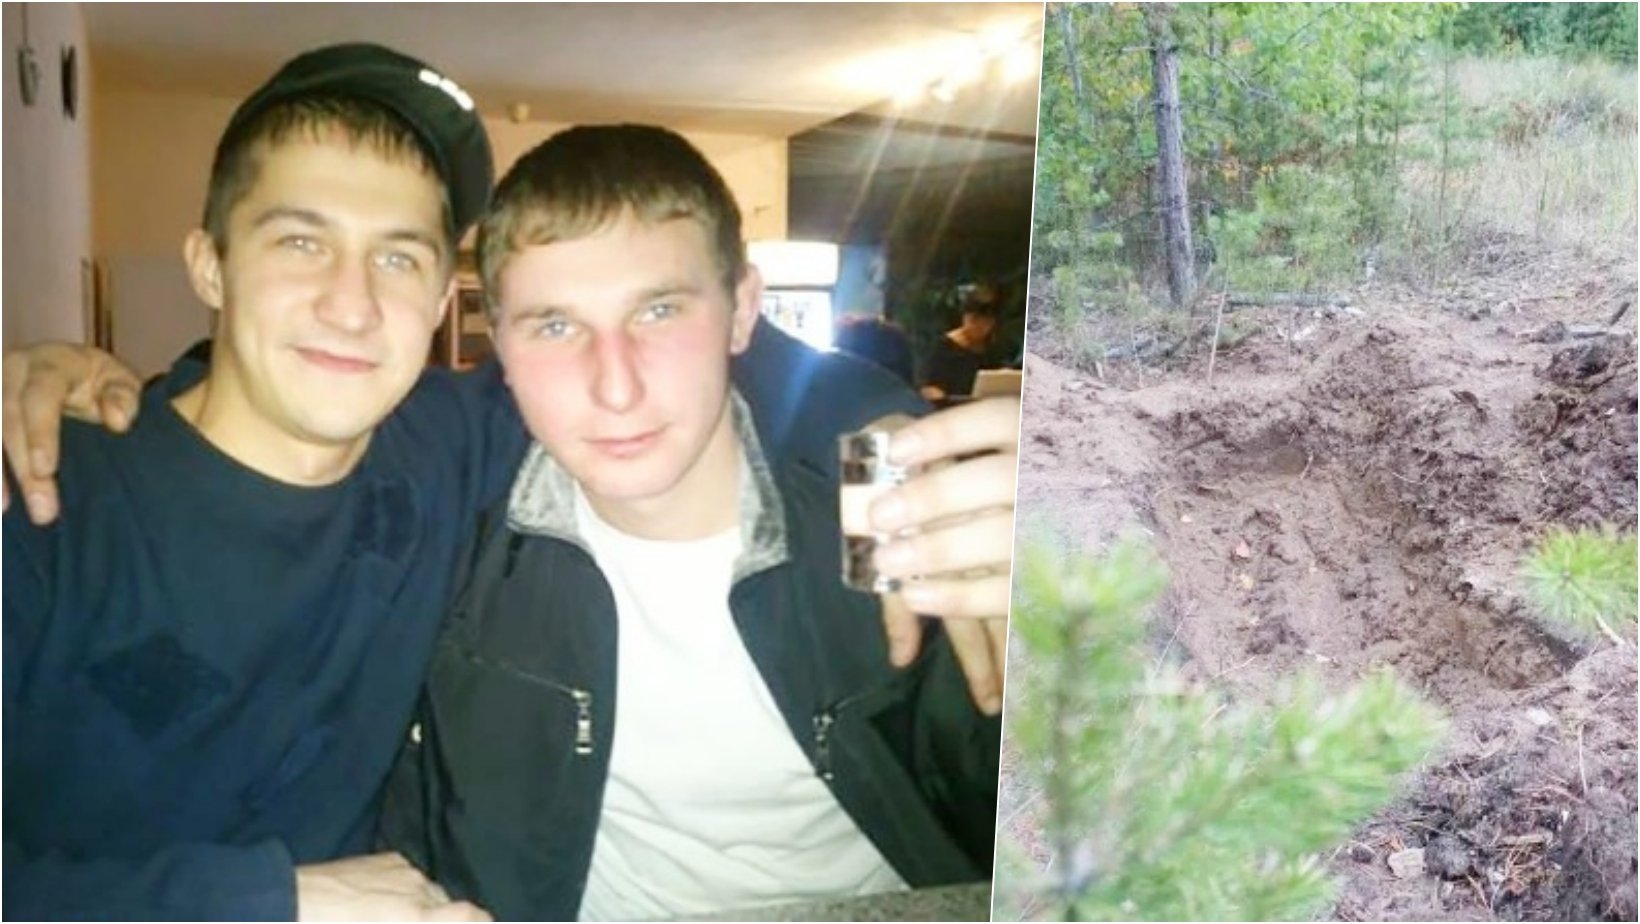 Outraged Father Forced His Pedo Friend To Dig His Own Grave After Finding A Video Of Him Abusing